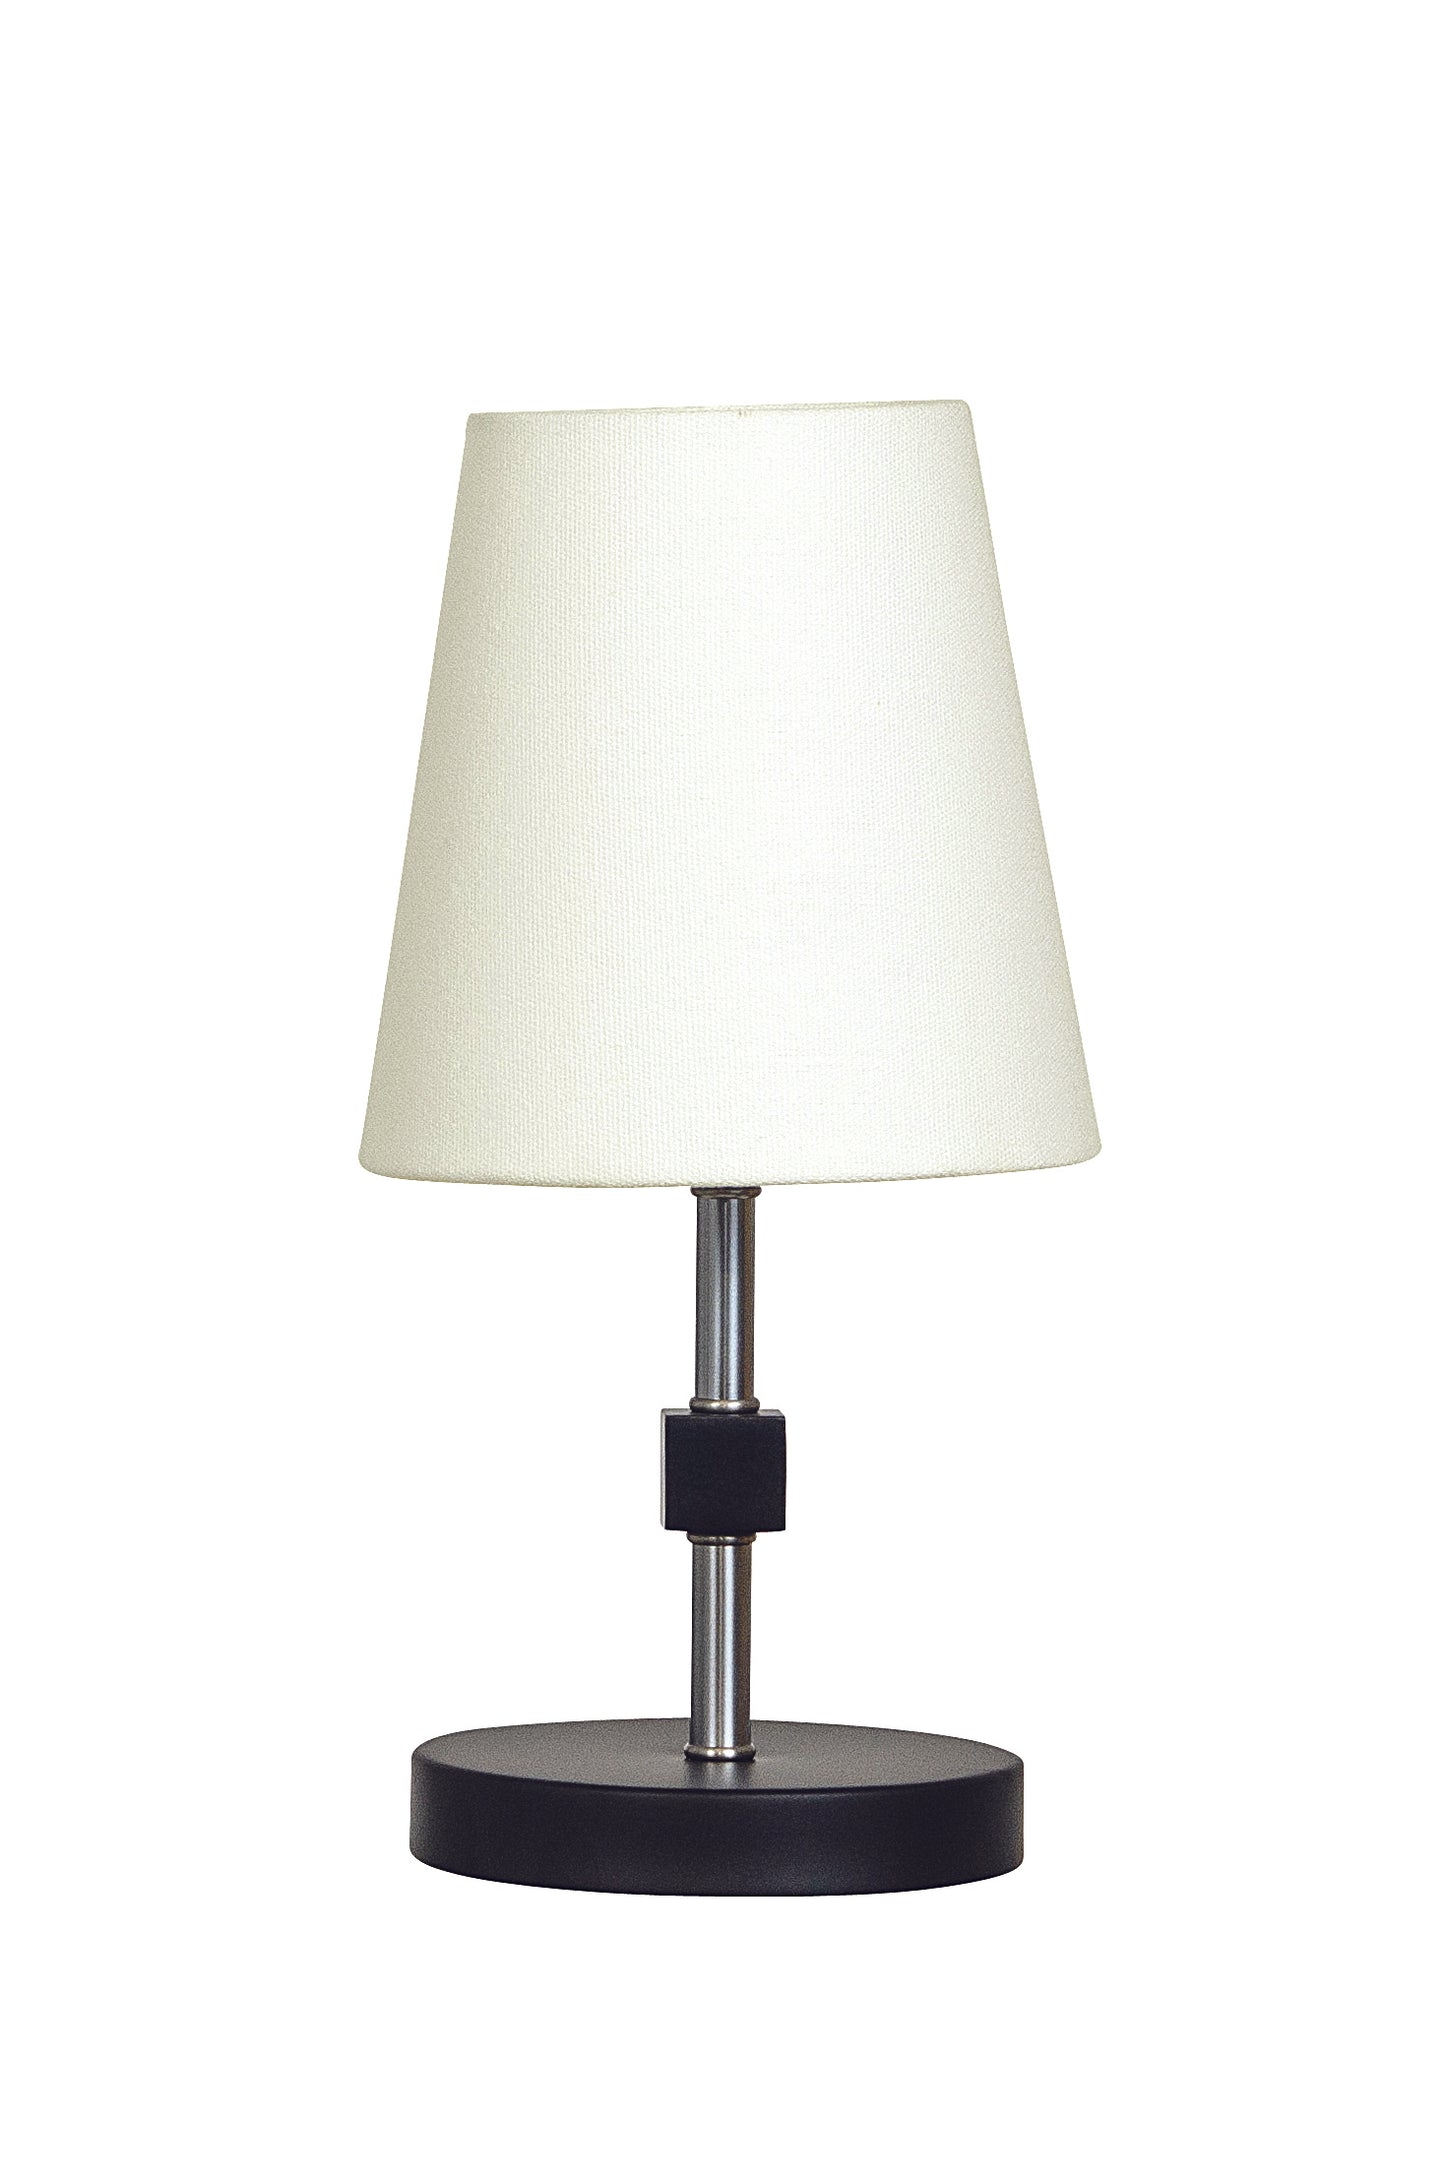 House of Troy Bryson Table Lamp B203-BLK-SN